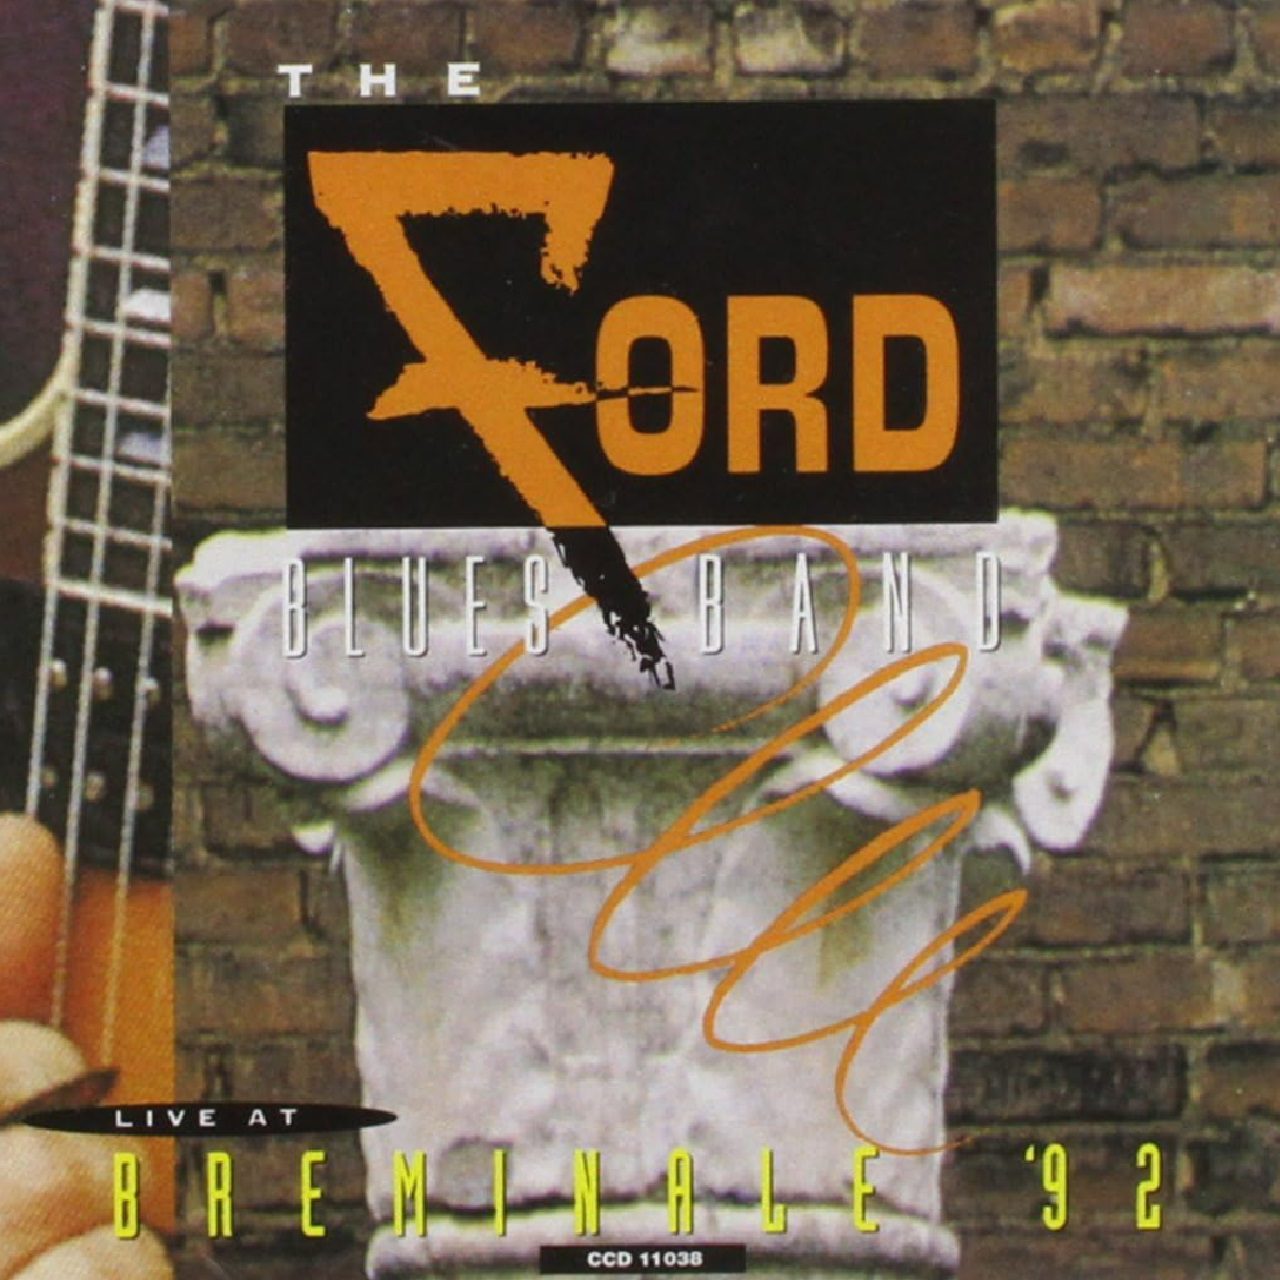 Ford Blues Band – Live At Breminale ‘92 cover albun